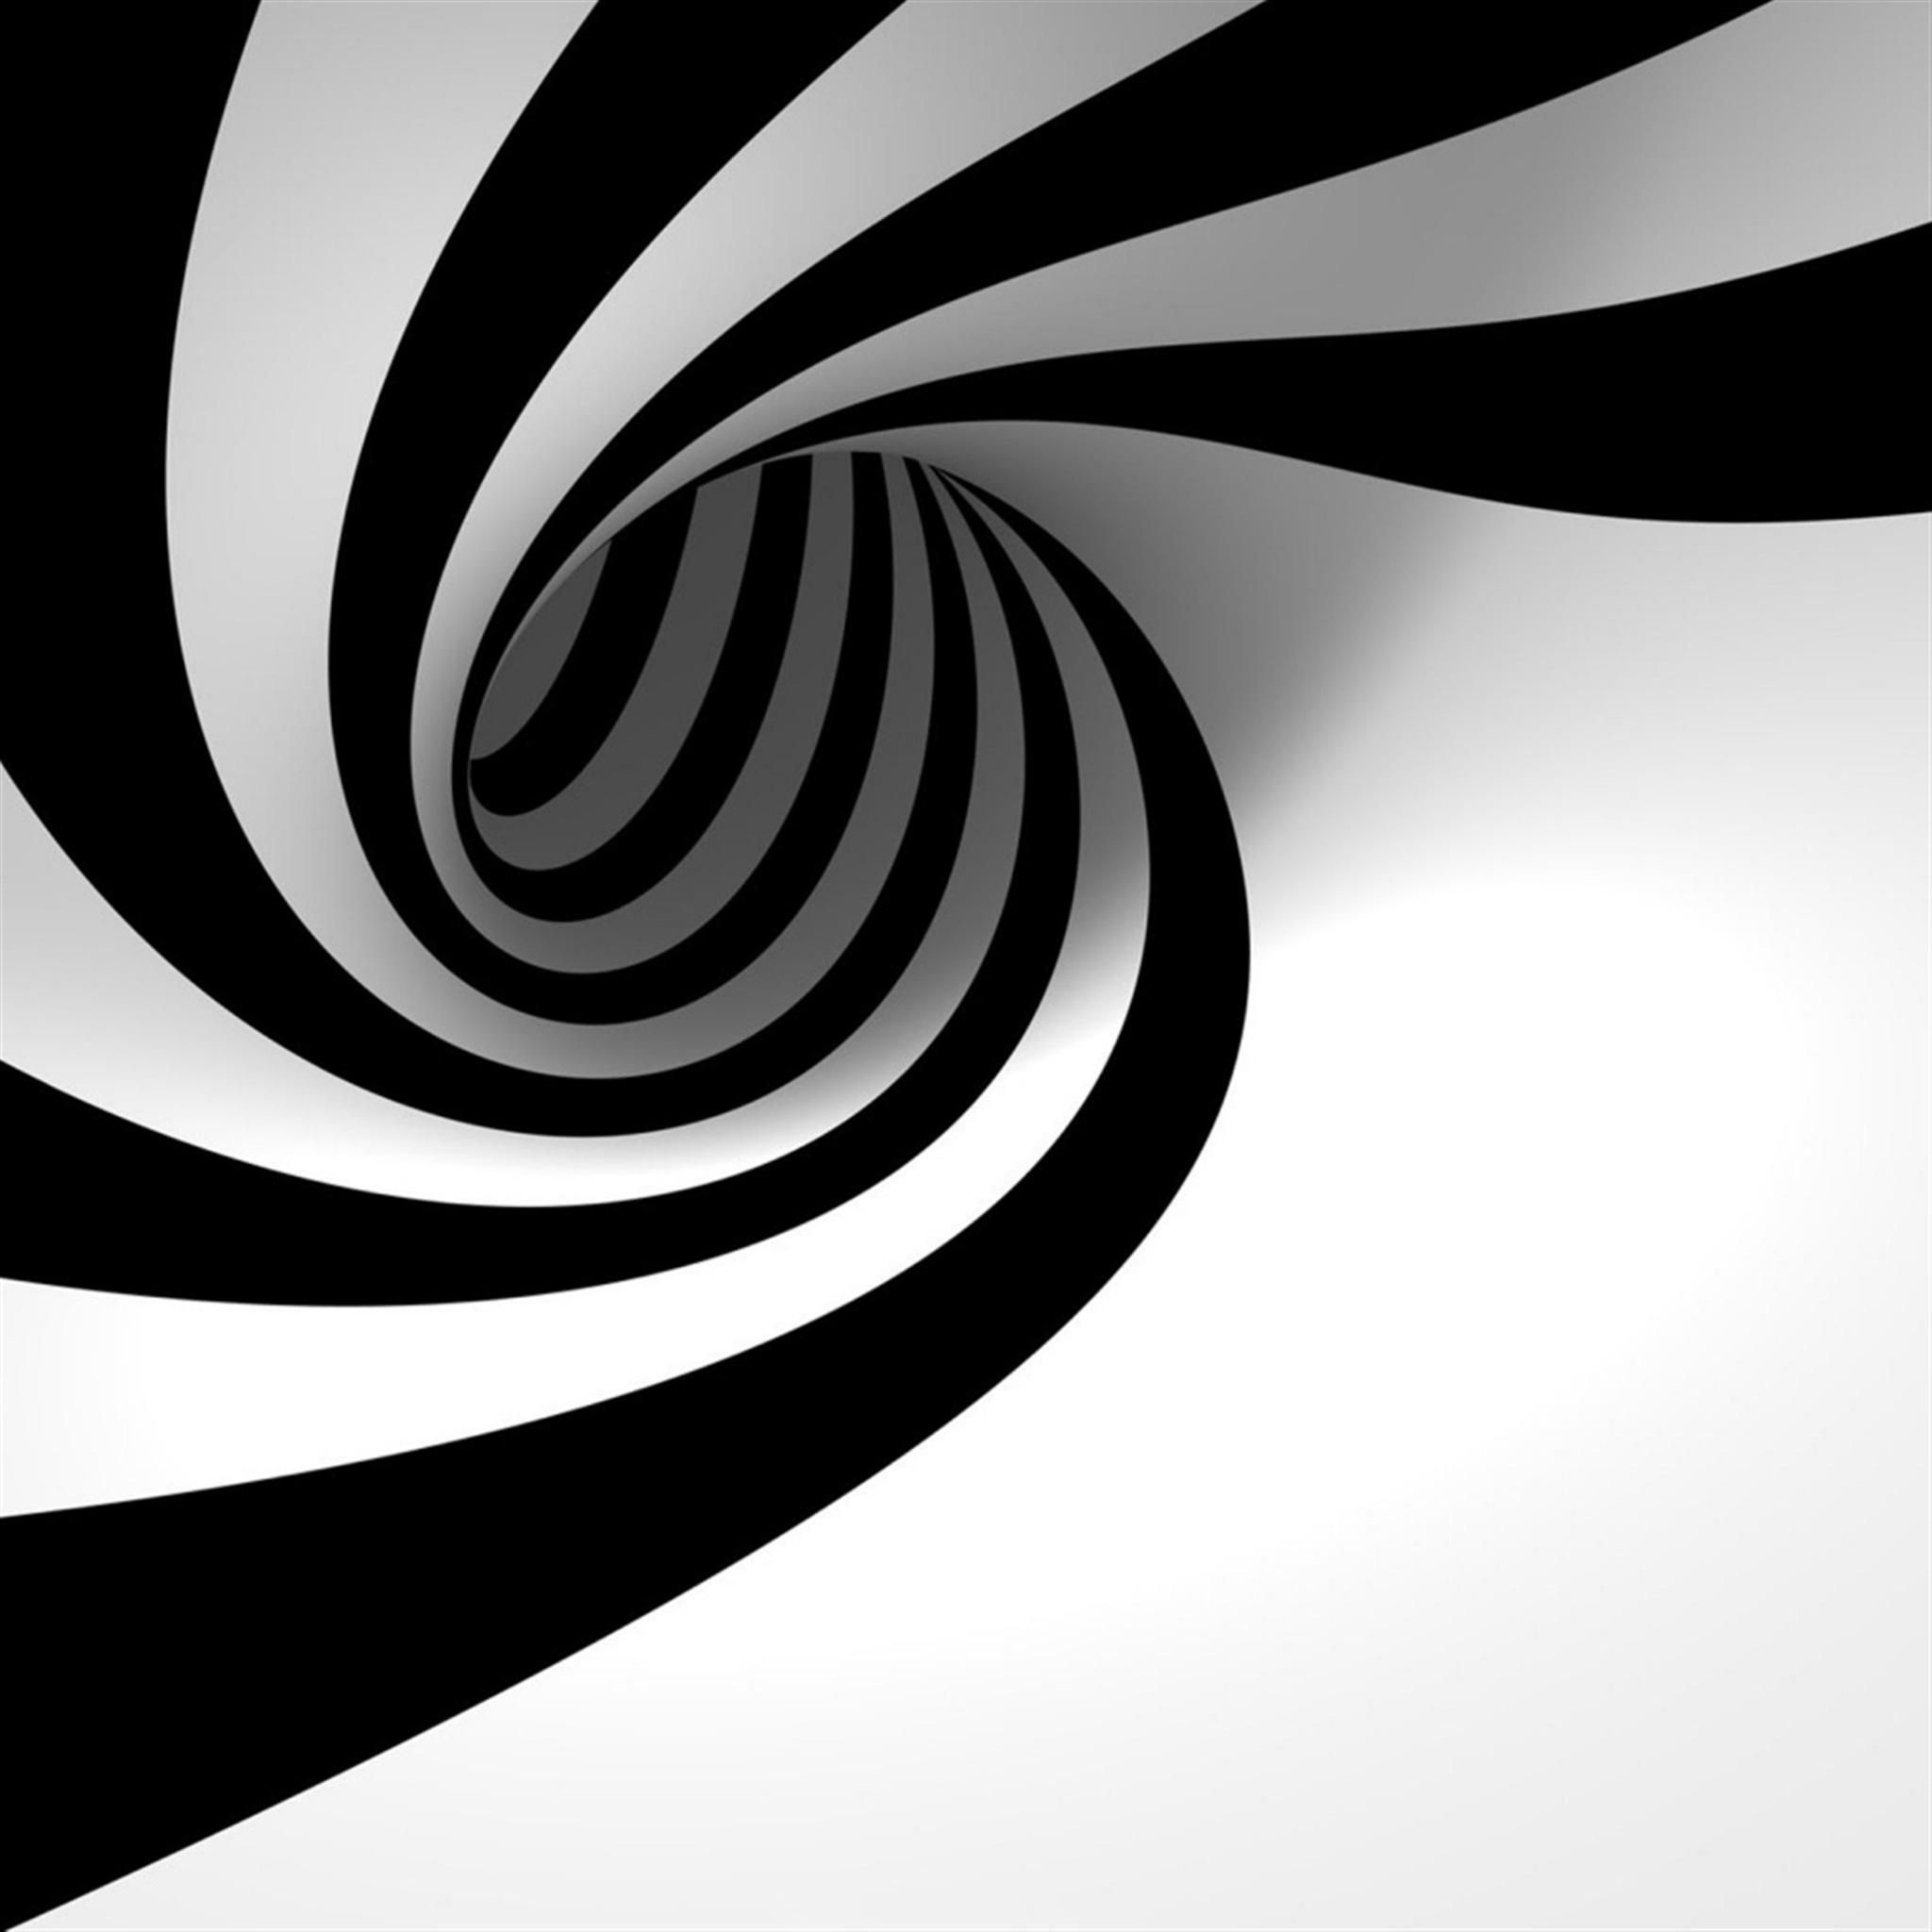 iWallpapers - 3D hypnotic spiral background | iPad air wallpapers